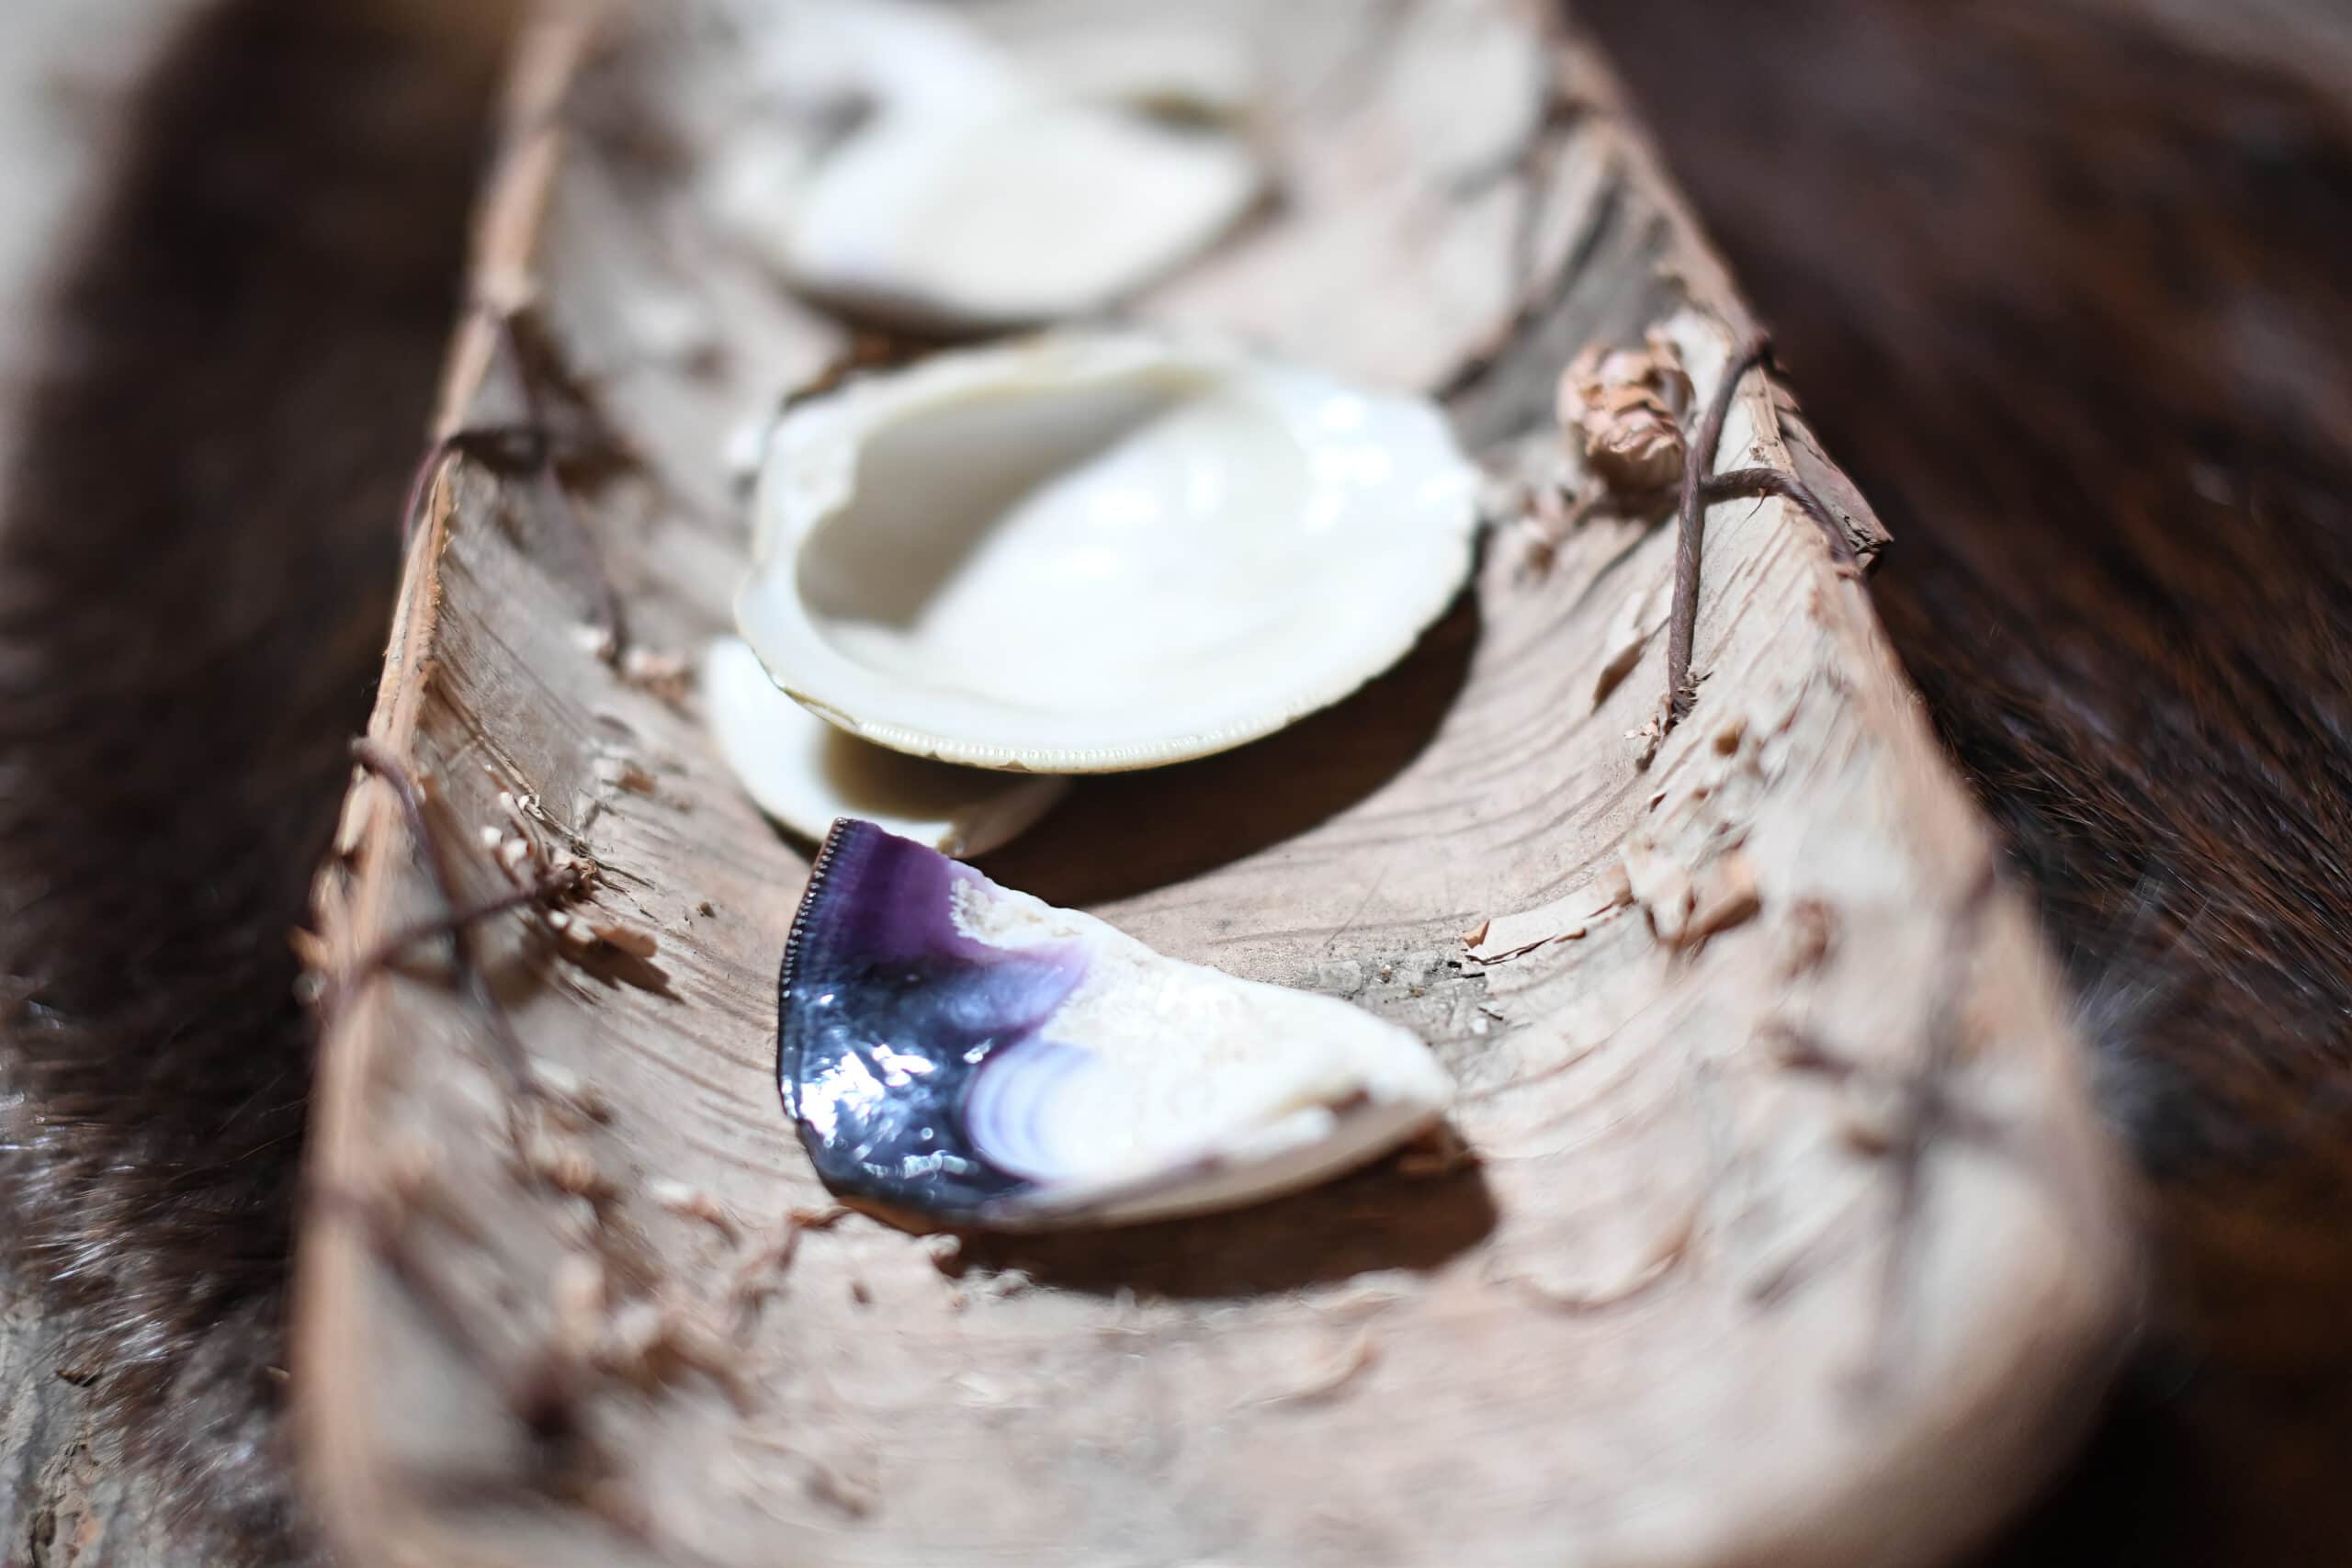 Pieces of purple and white shell sit in a half-cylindrical tray made of birch bark.